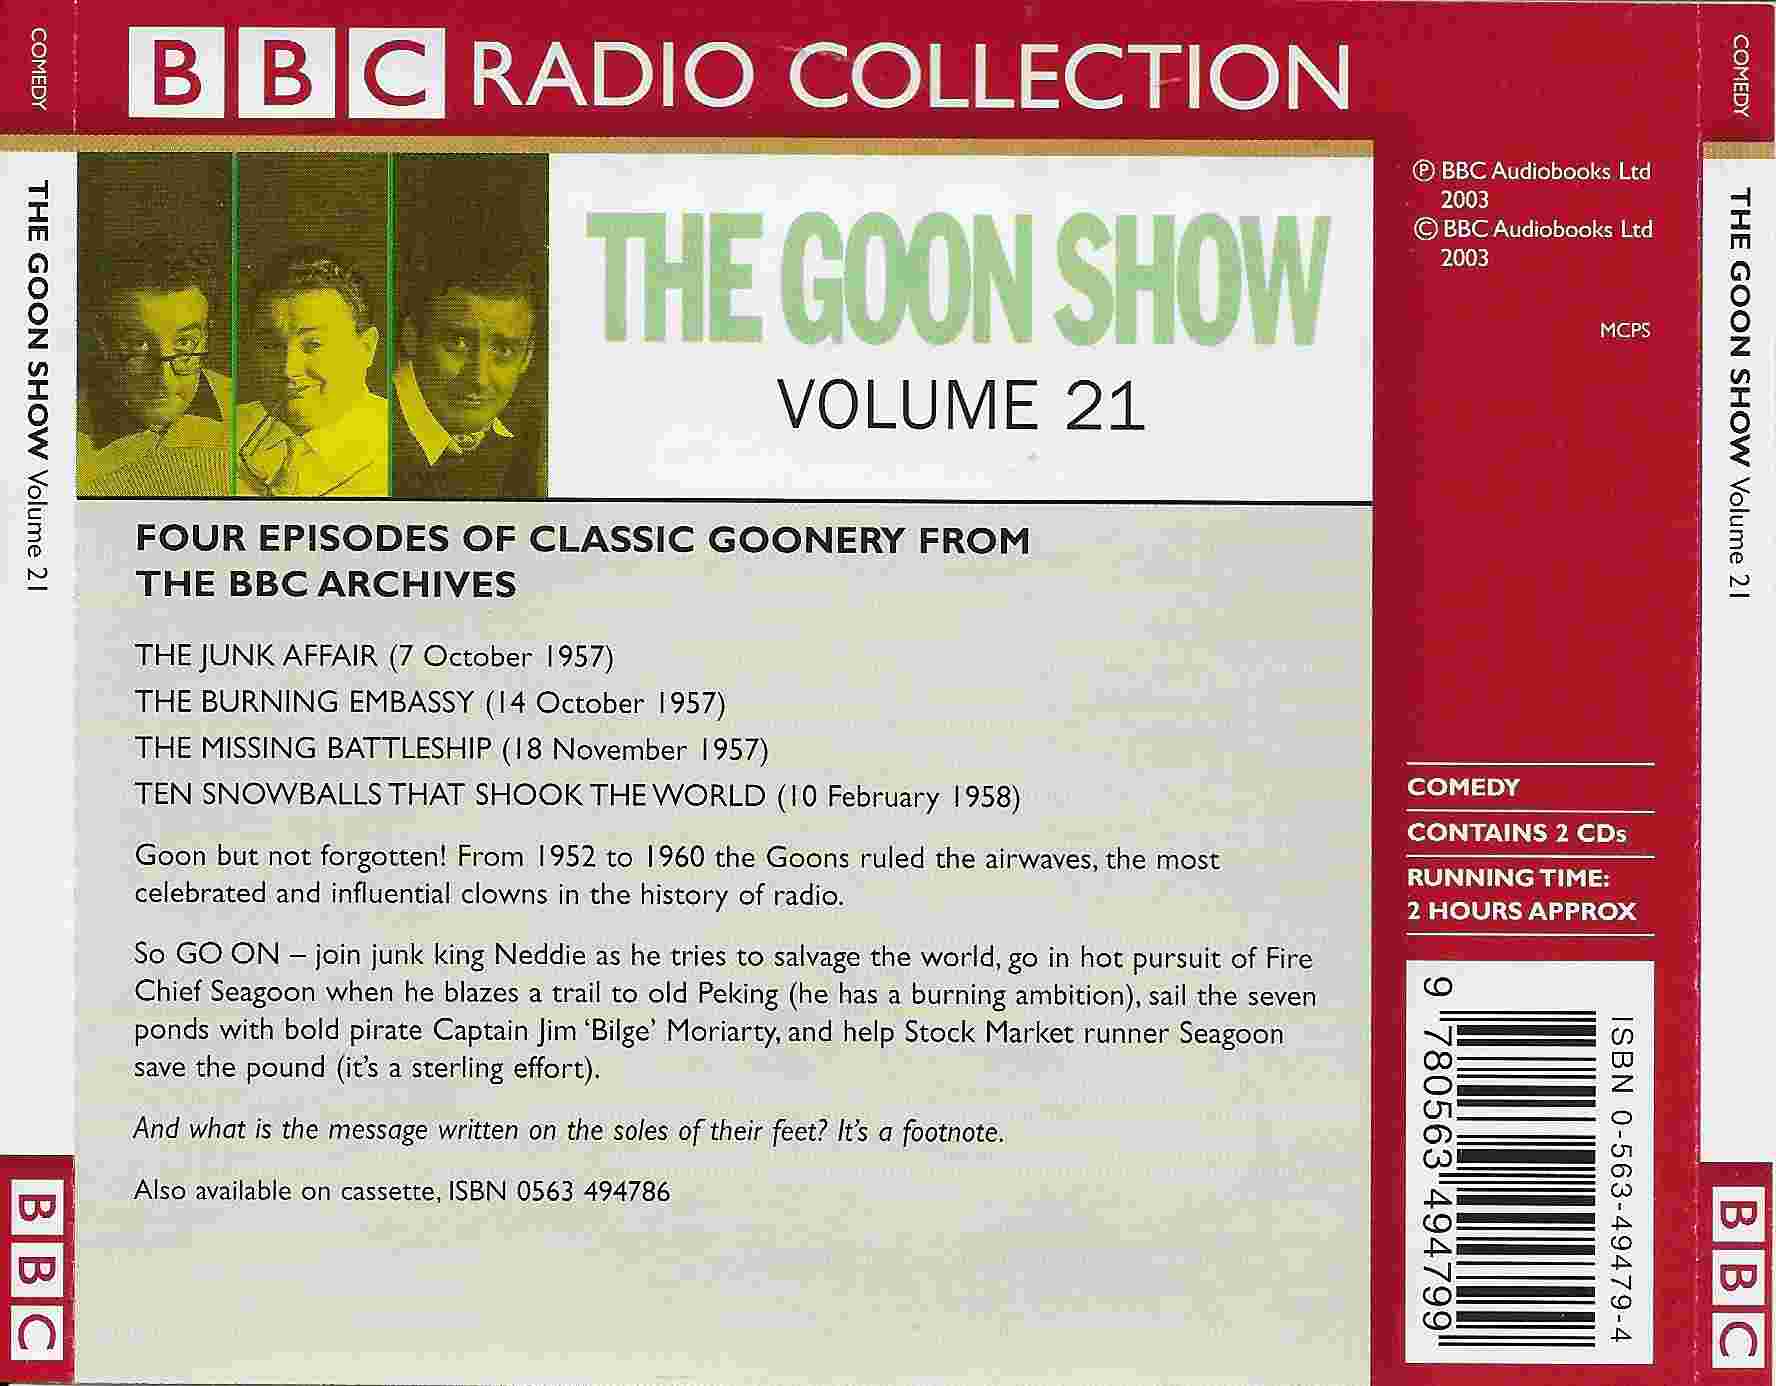 Picture of ISBN 0-563-49479-4 The Goon show 21 - The missing battleship by artist Spike Milligan / Larry Stephens from the BBC records and Tapes library